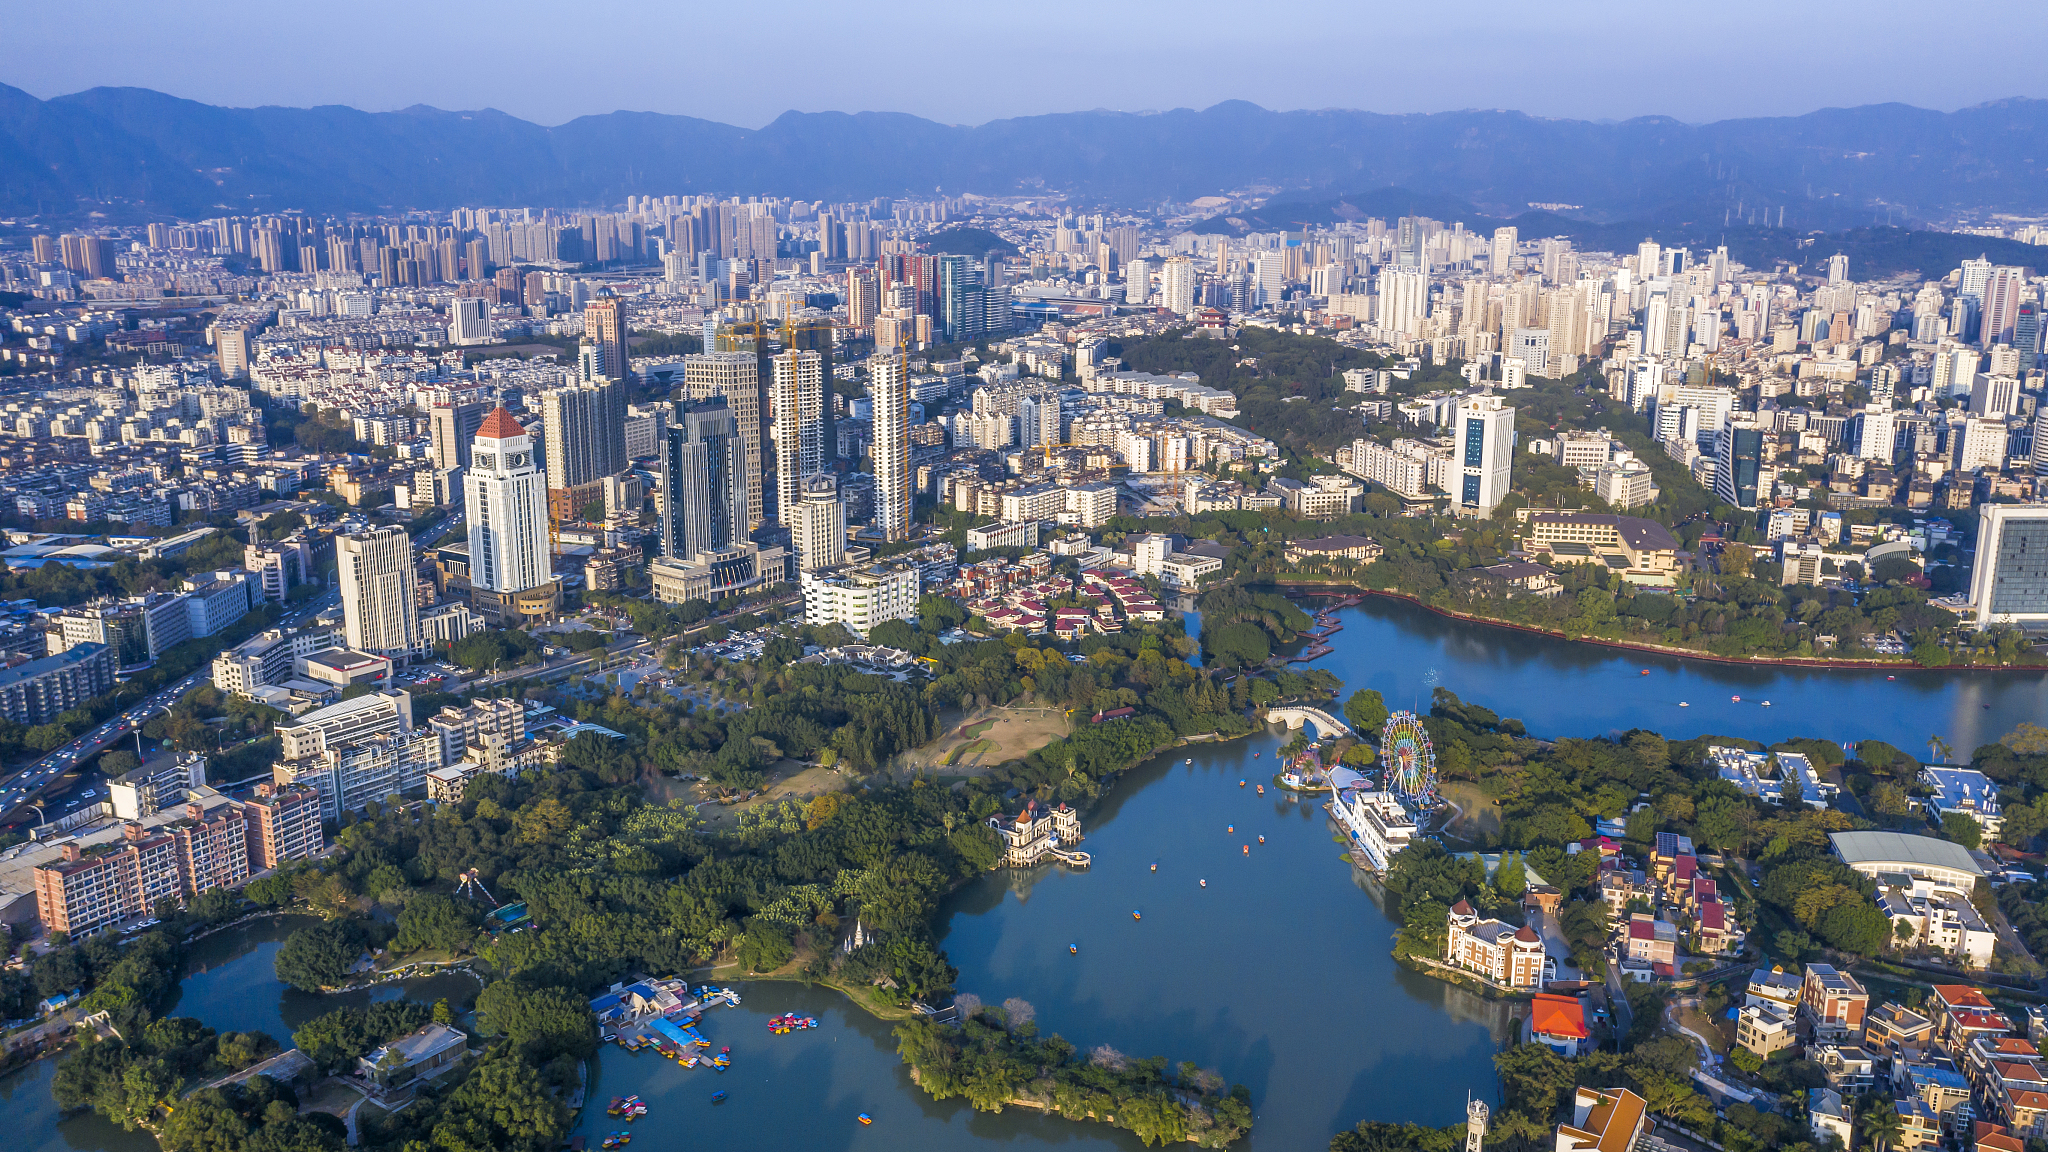 Live: An aerial view of China's Fuzhou, the City of the Banyan Tree